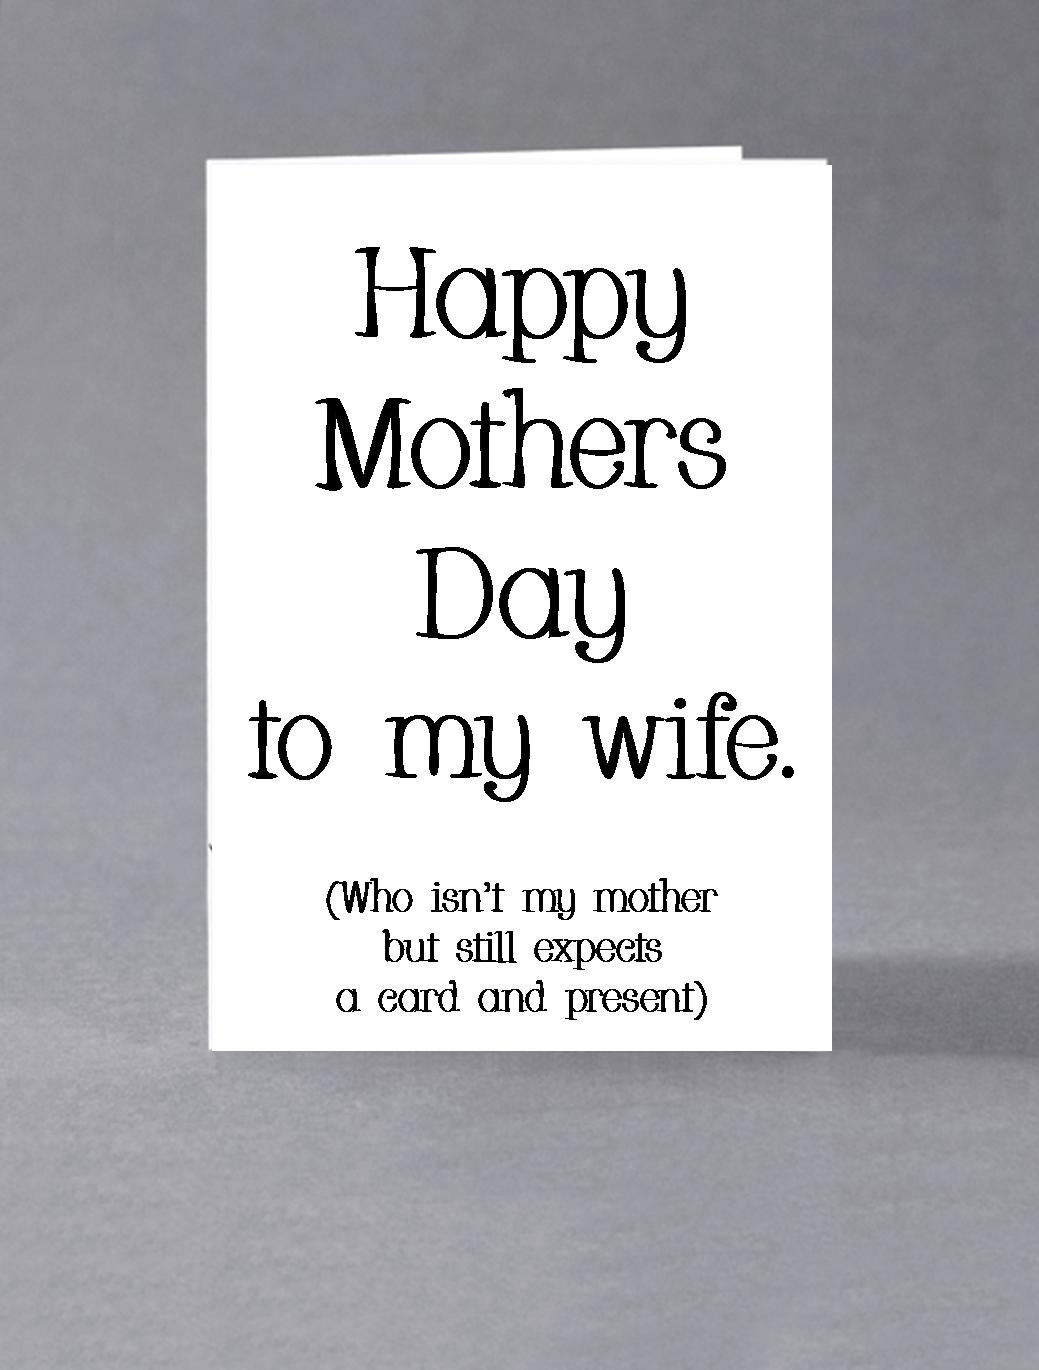 Funny sarcastic Mothers Day card Happy Mother's Day to